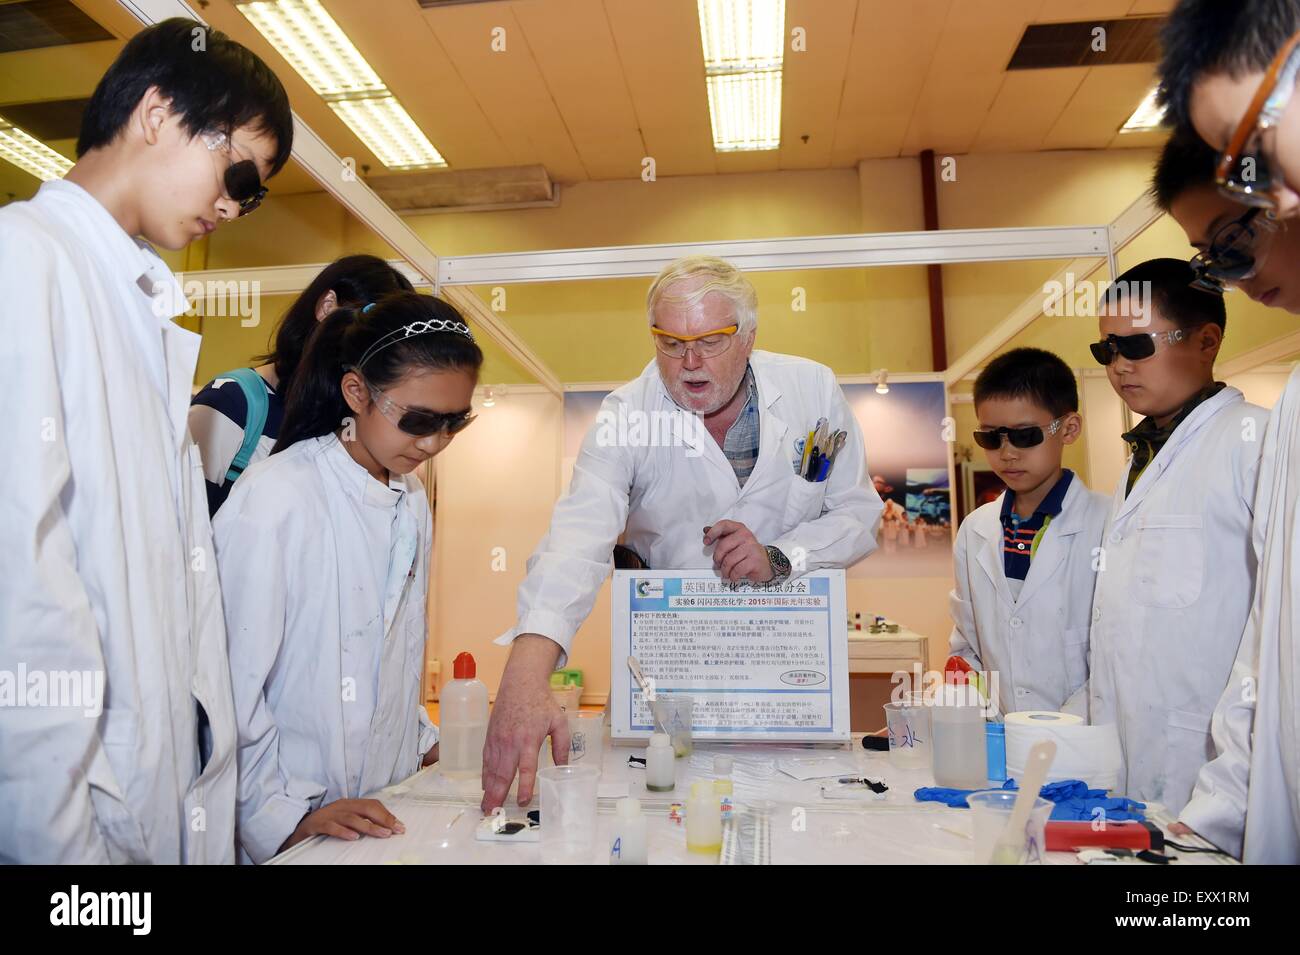 Beijing, China. 17th July, 2015. A scientist from the Beijing office of Britain's Royal Society of Chemistry helps children to do experiments at the 2015 China Science Festival in Beijing, China, July 17, 2015. The 2015 China Science Festival kicked off in Beijing Exhibition Center on Friday, attracting 125 organizations, institutes and enterprises from 12 countries and regions. The theme of the festival is light and color. Credit:  Chen Yehua/Xinhua/Alamy Live News Stock Photo